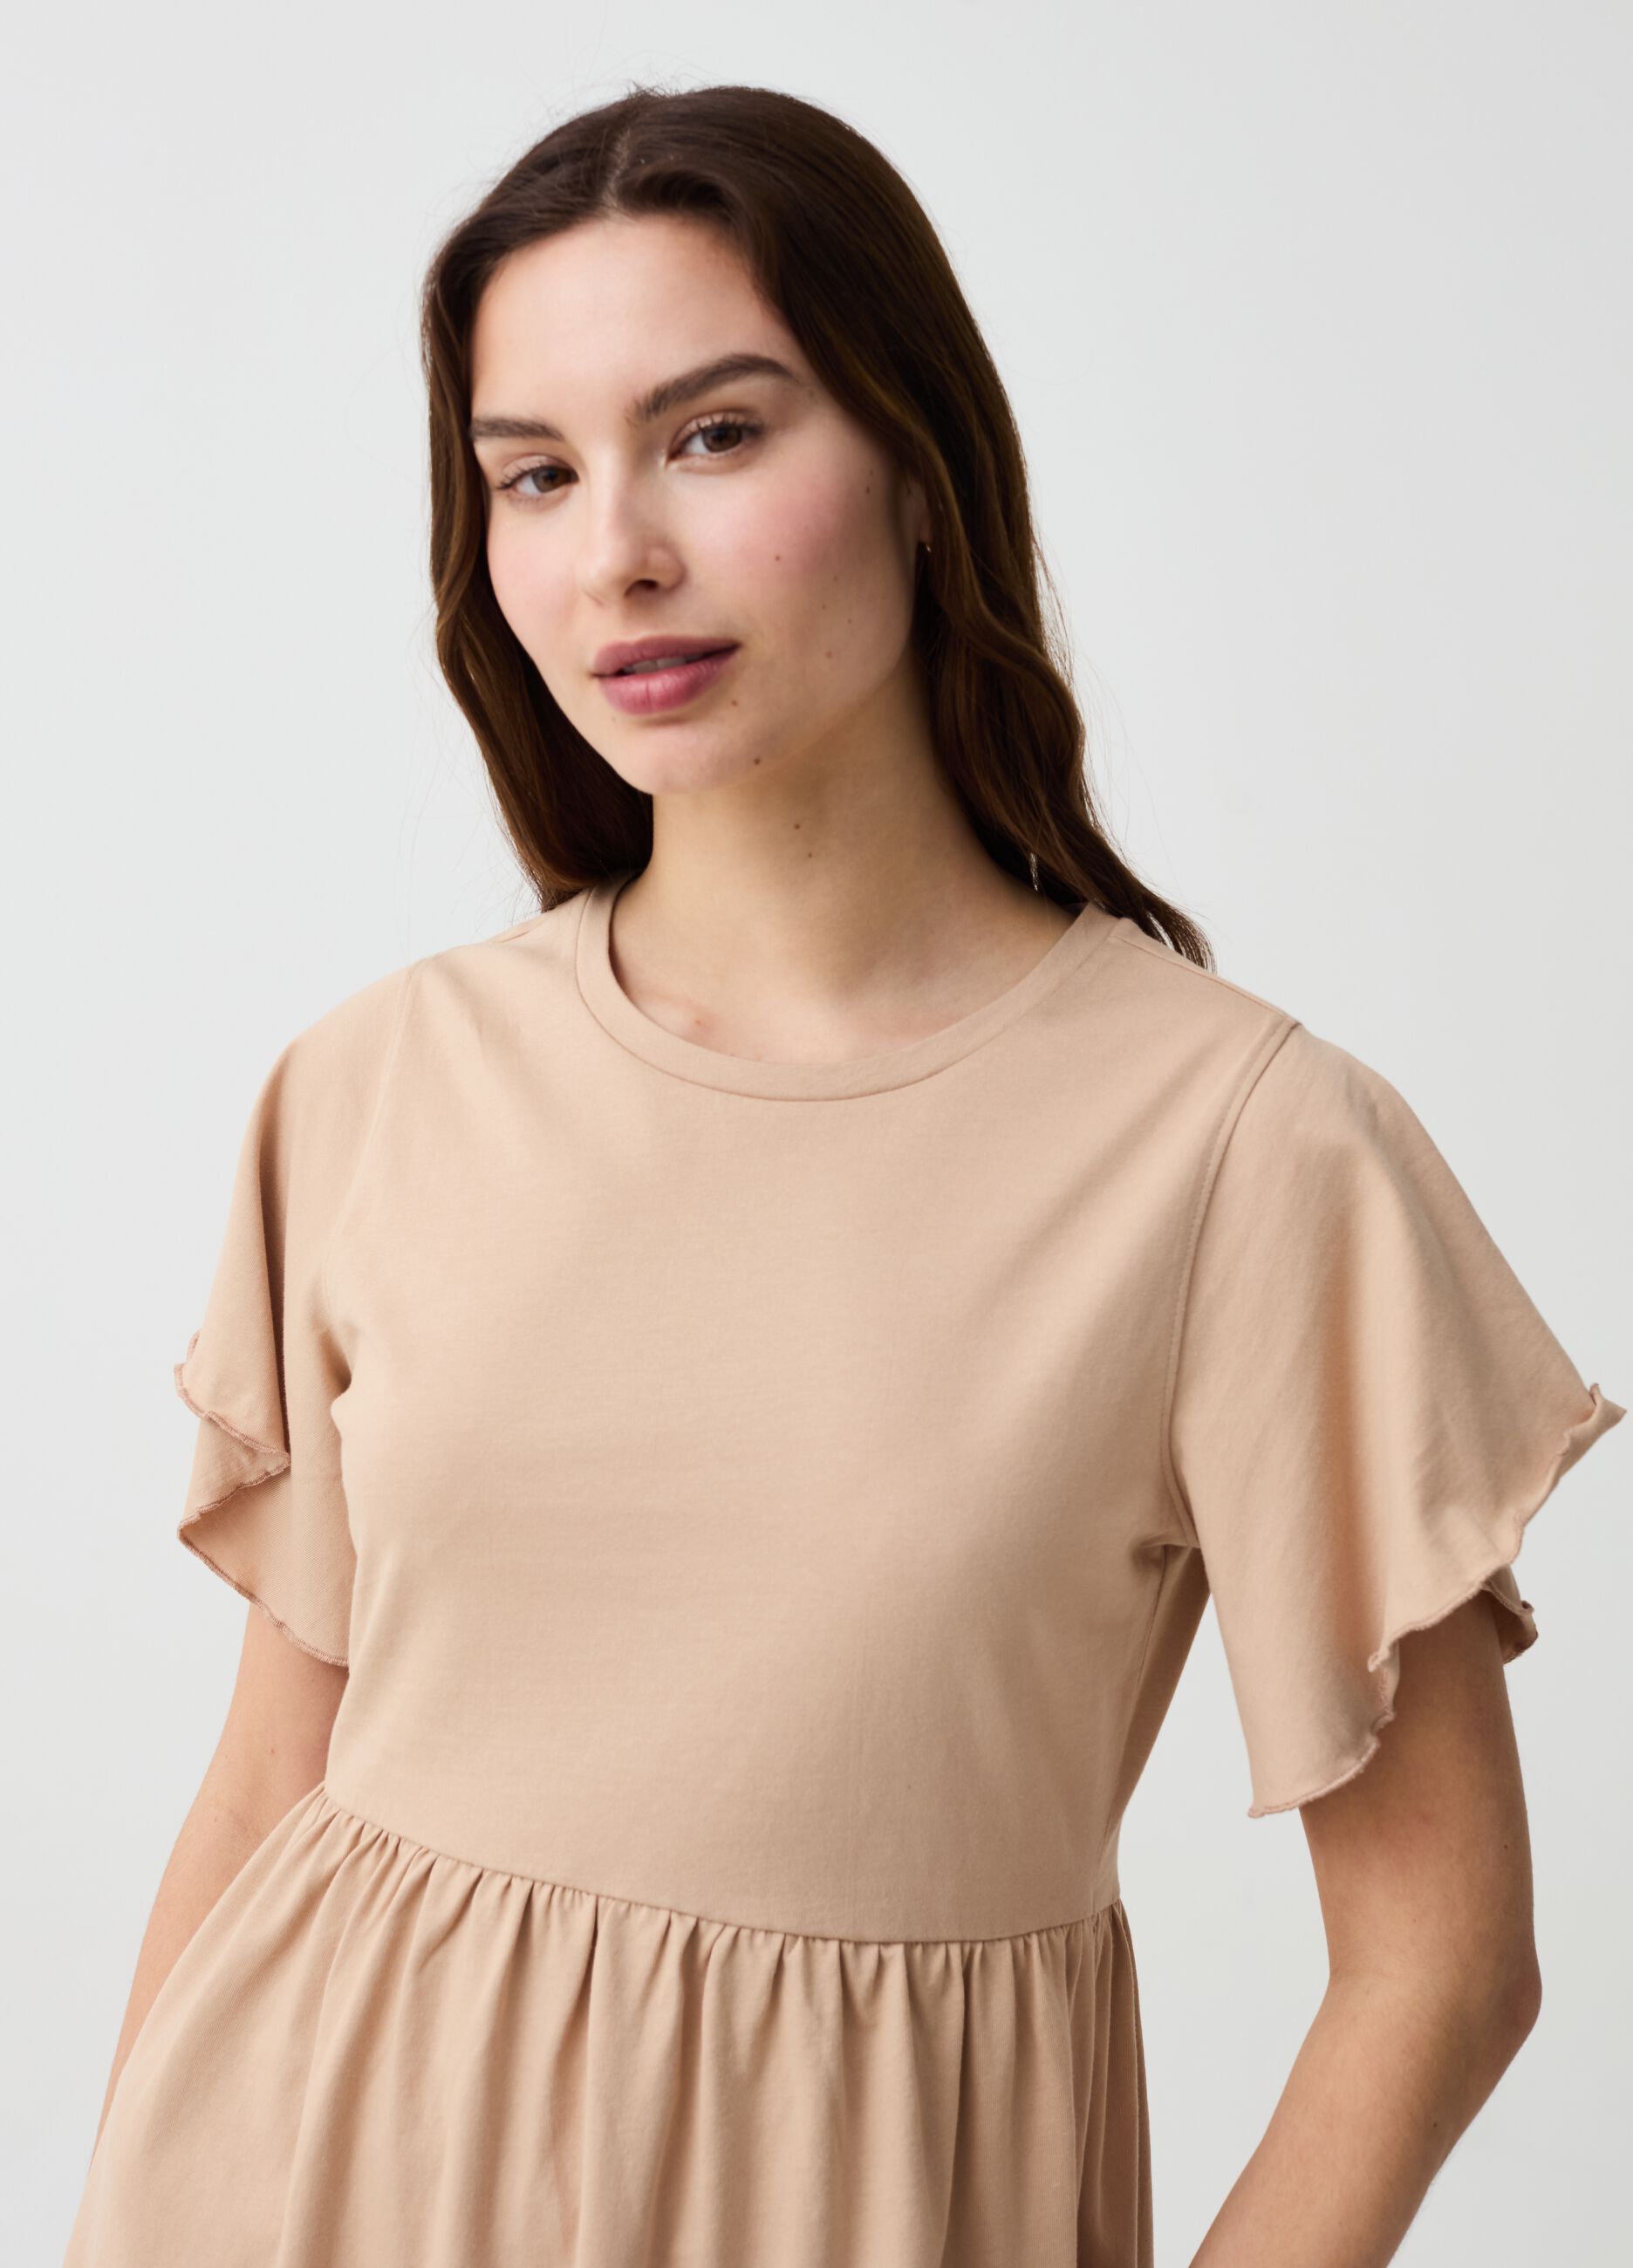 Essential short dress with butterfly sleeves